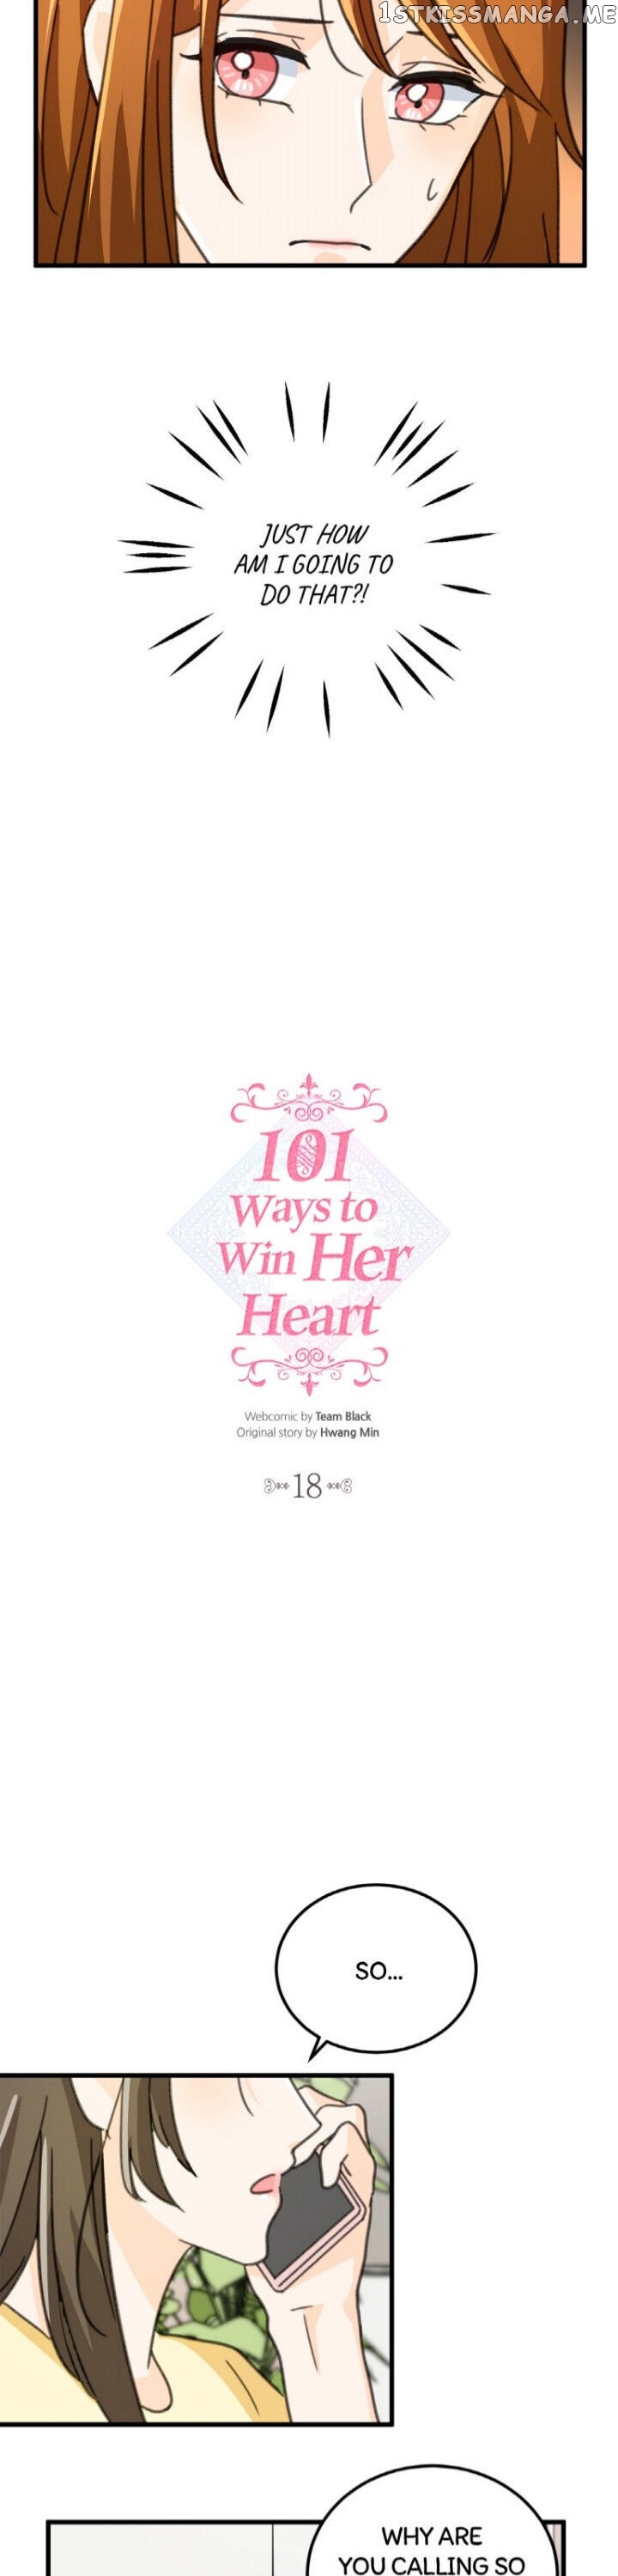 101 Ways to Win Her Heart chapter 18